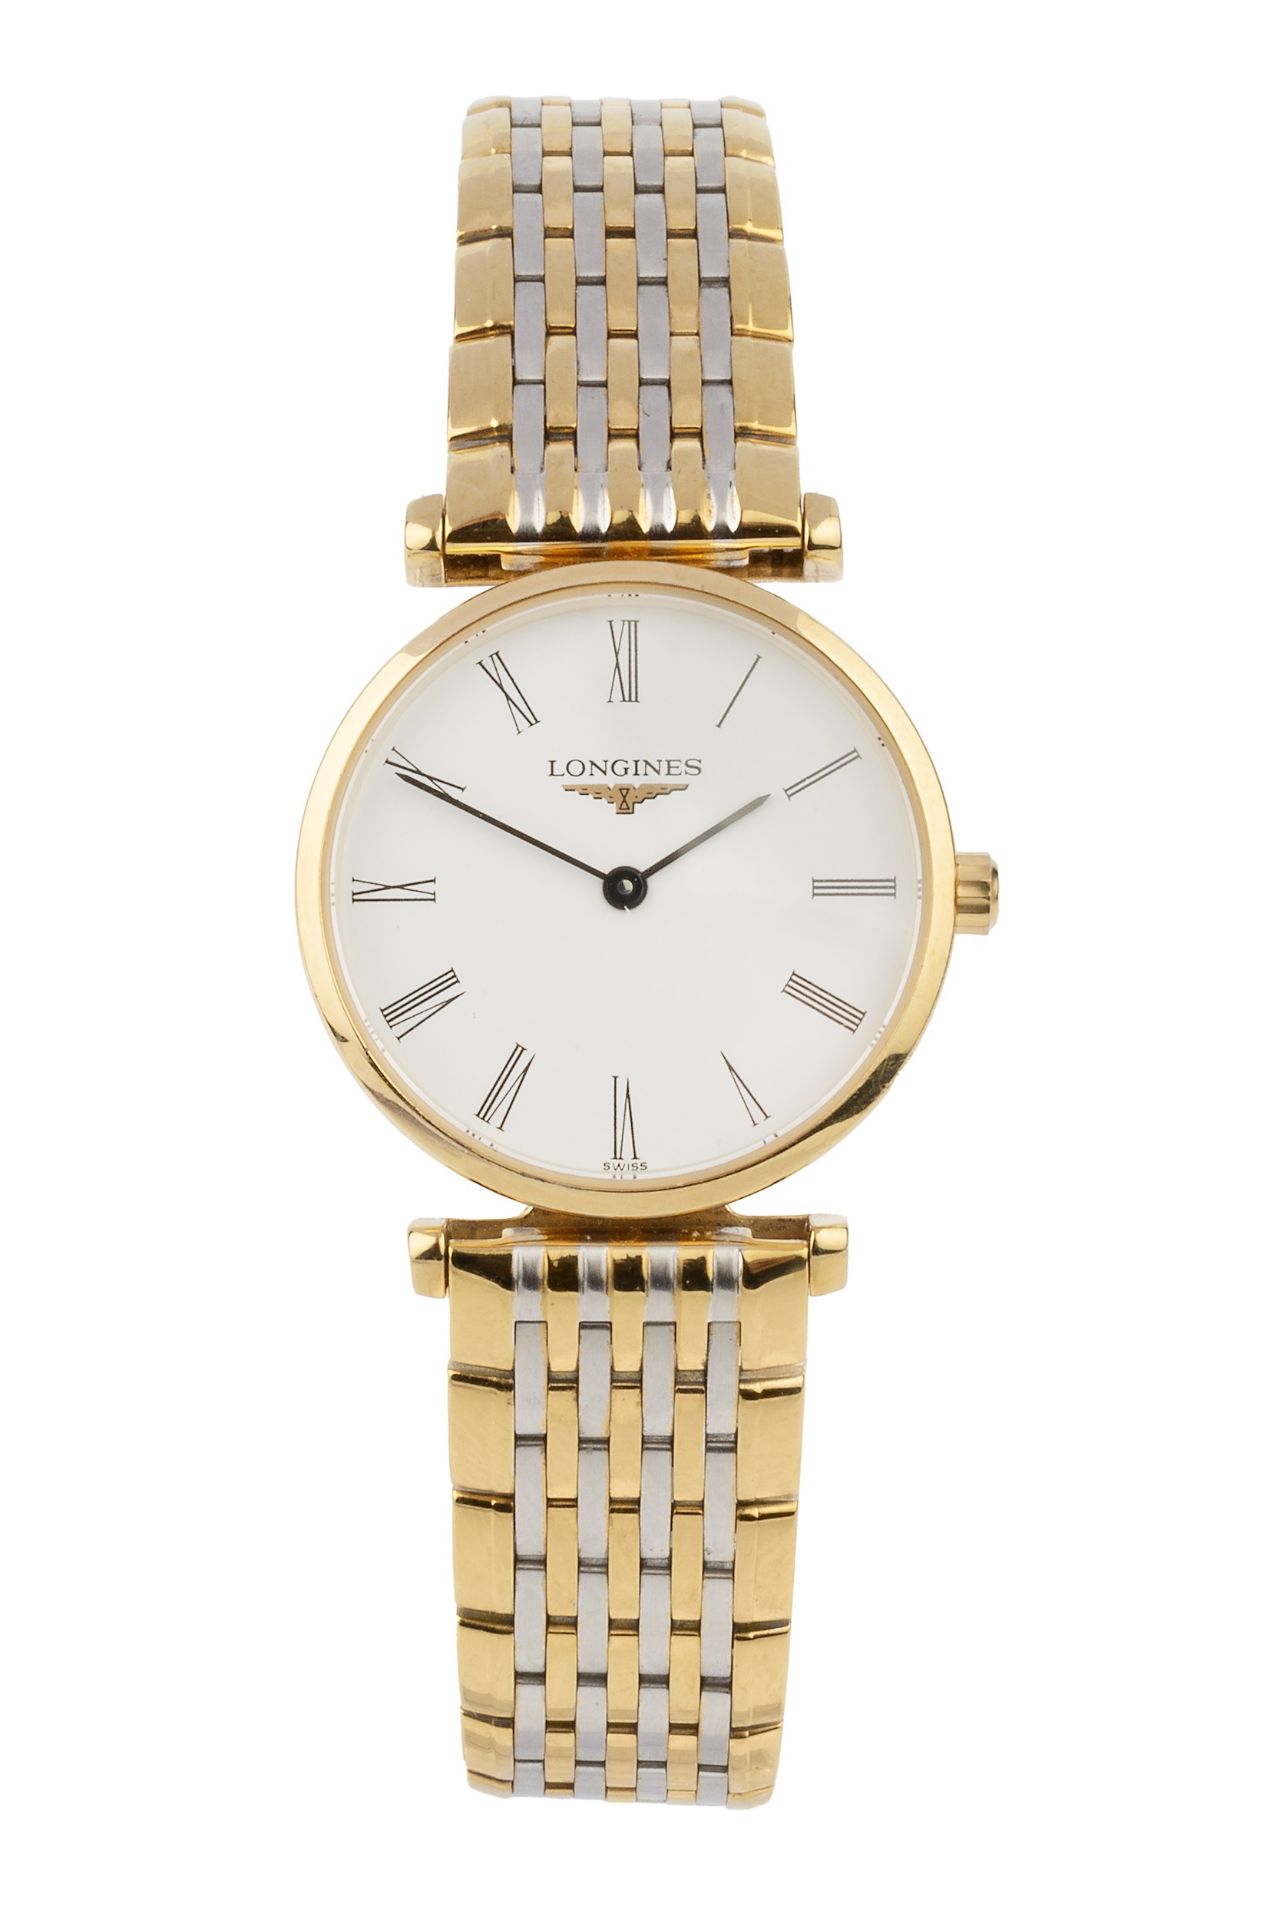 A lady's 'Grand Classique' gold plated wristwatch by Longines, with white circular dial and quartz